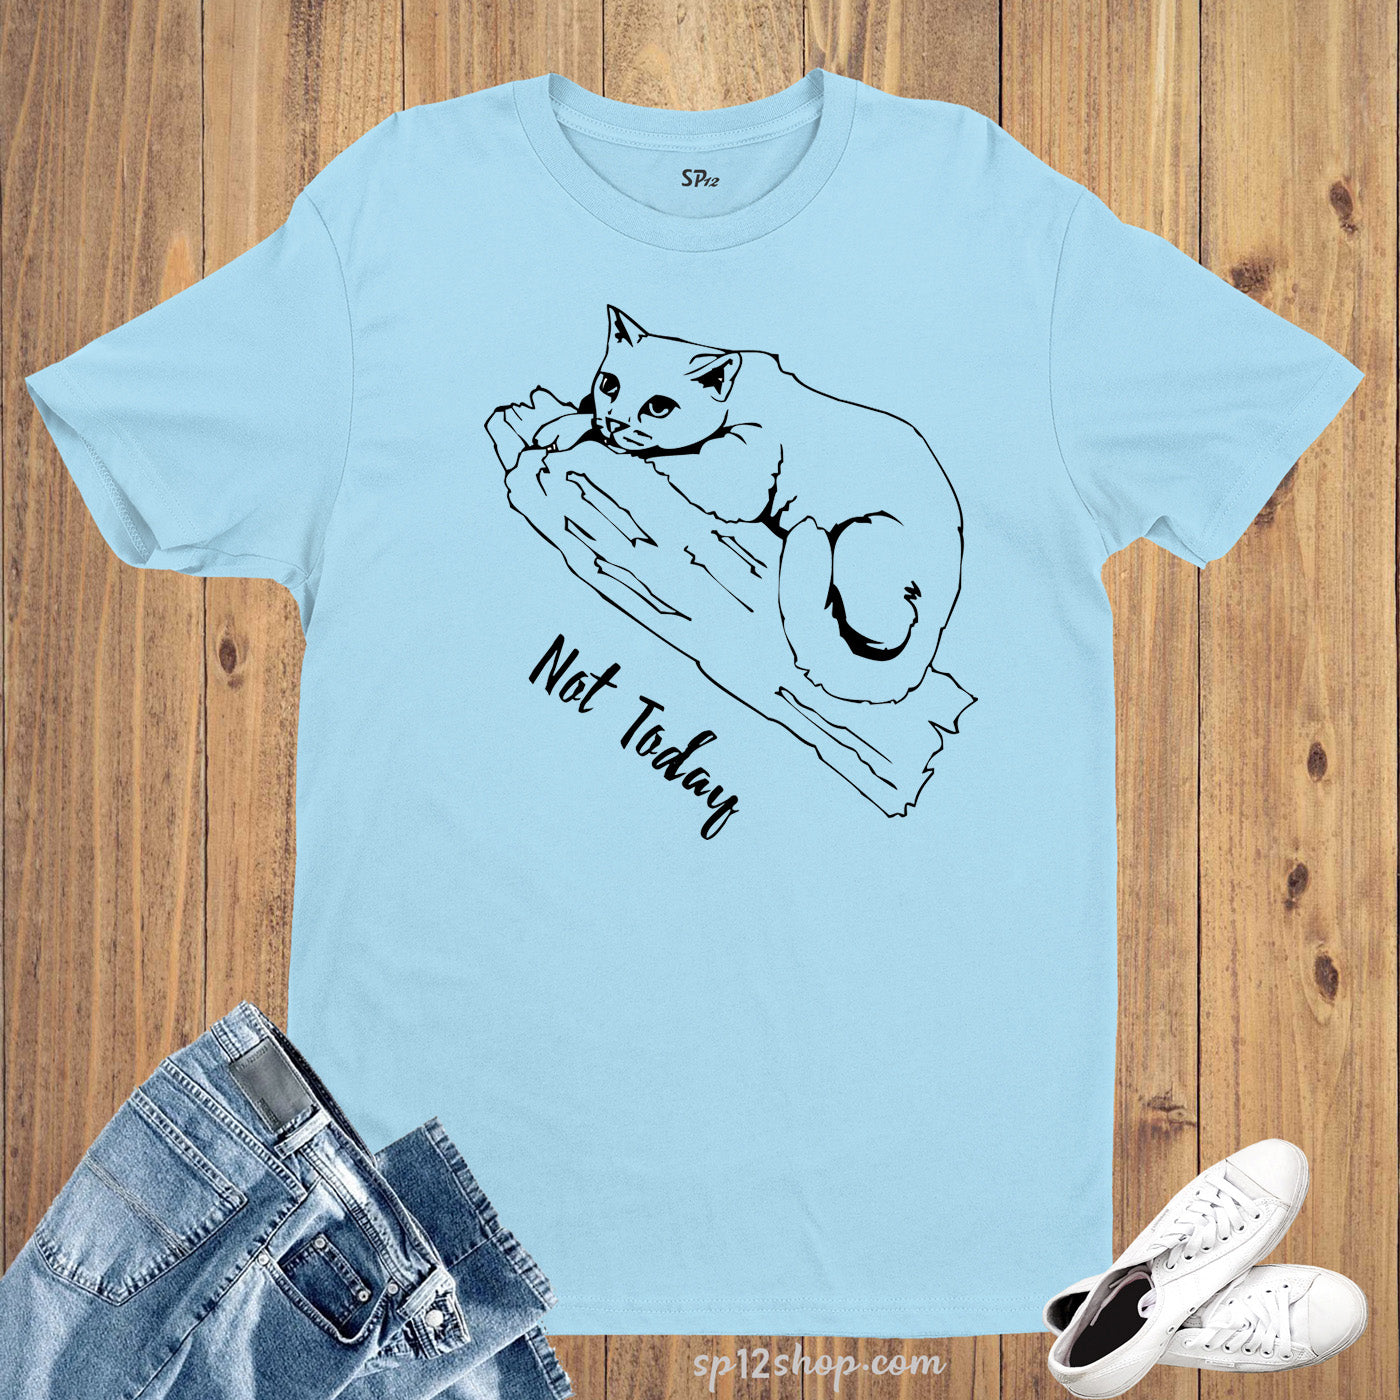 Graphic T Shirt Not Today Cat Lazy Relax Chill tshirt Tee